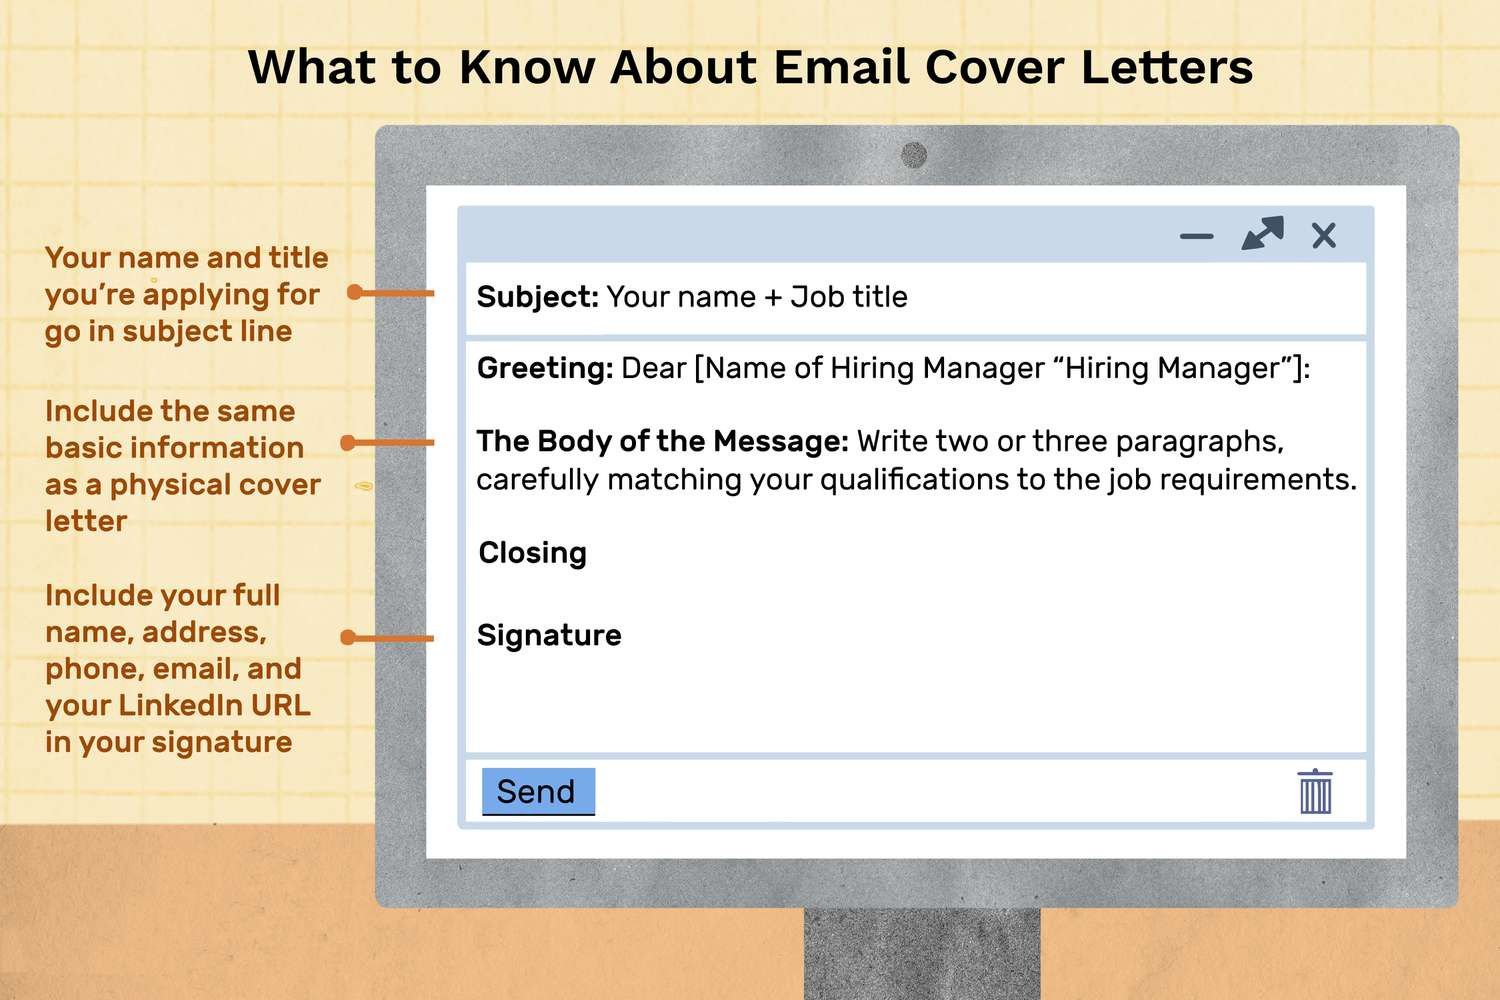 Email Sample to Send A Resume Sample Email Cover Letter Message for A Hiring Manager